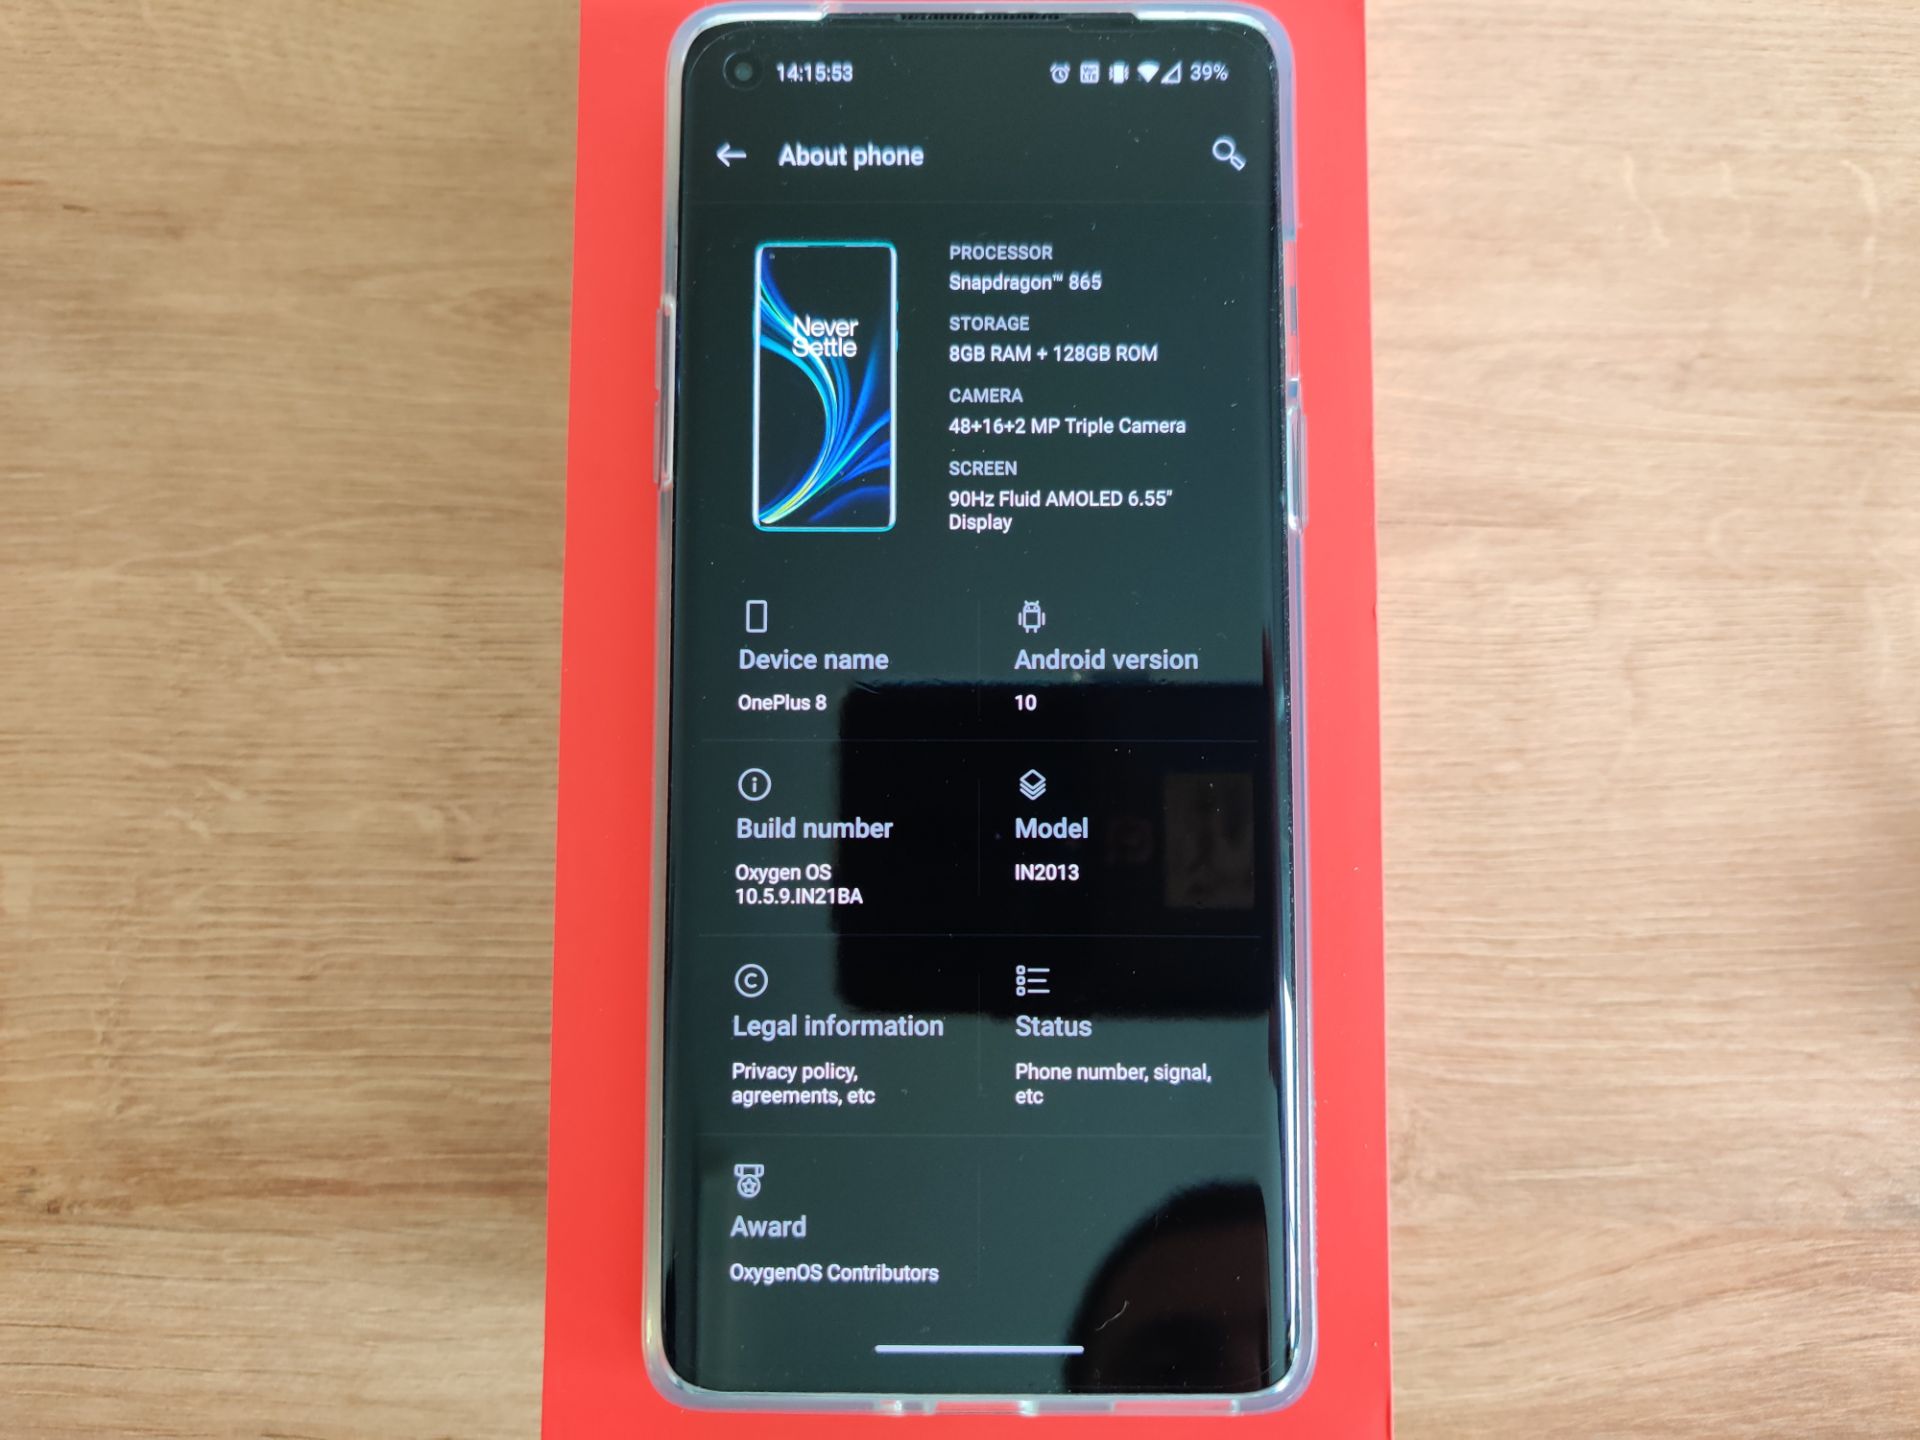 LIKE NEW! IMMACULATE CONDITION! ONEPLUS 8 128GB BLACK, UNLOCKED SMARTPHONE - LESS THAN A MONTH OLD! - Image 3 of 8